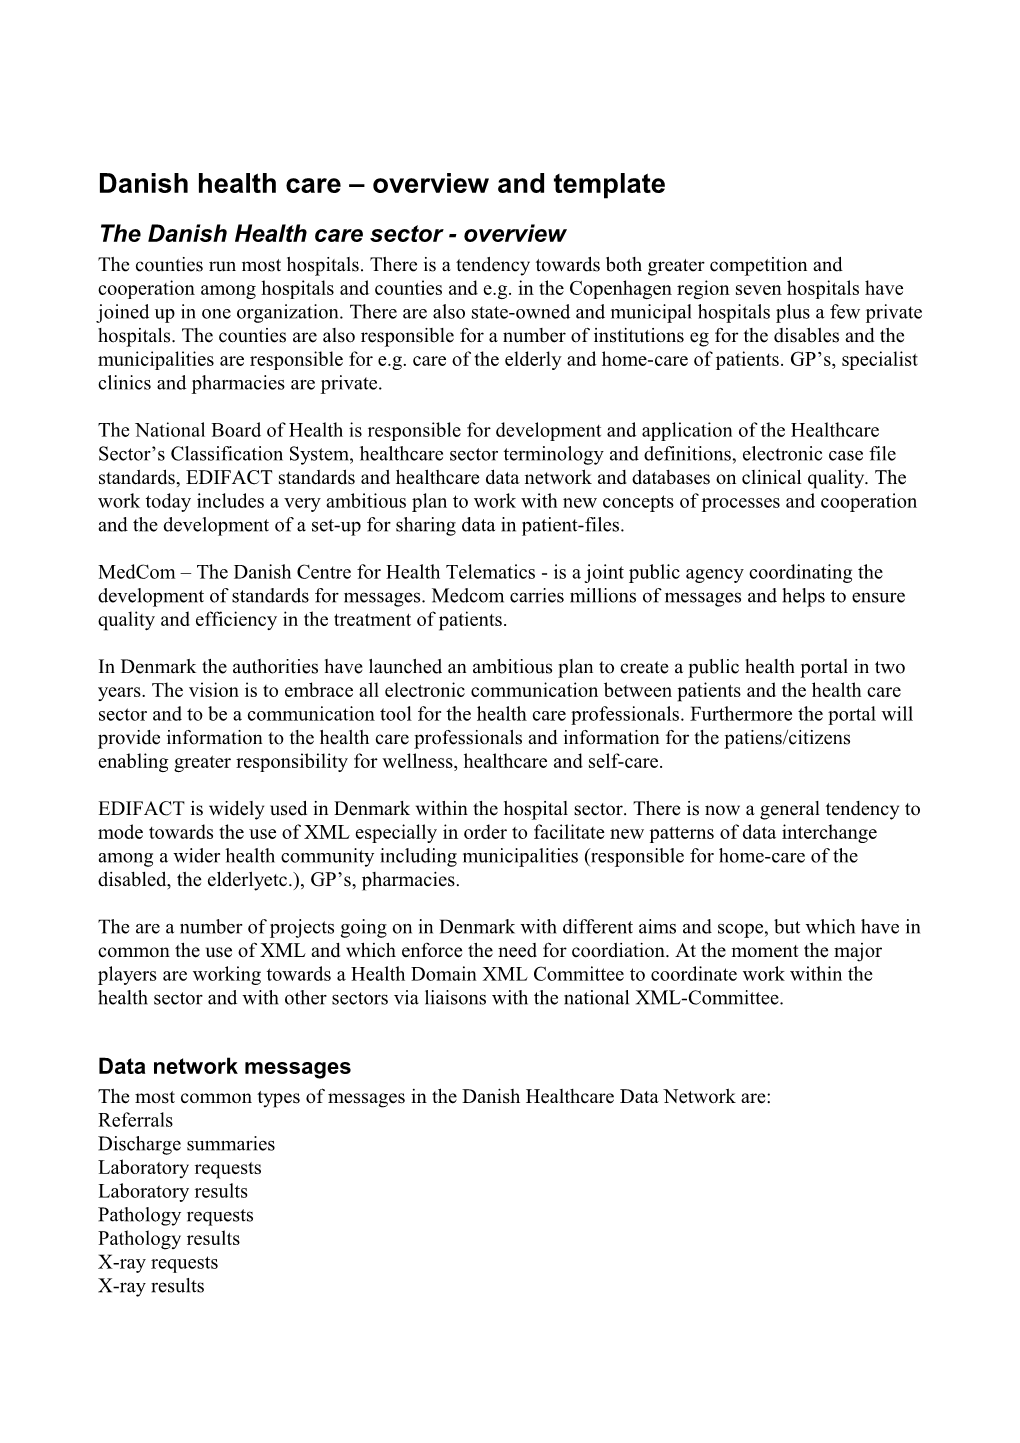 Danish Health Care Overview and Template